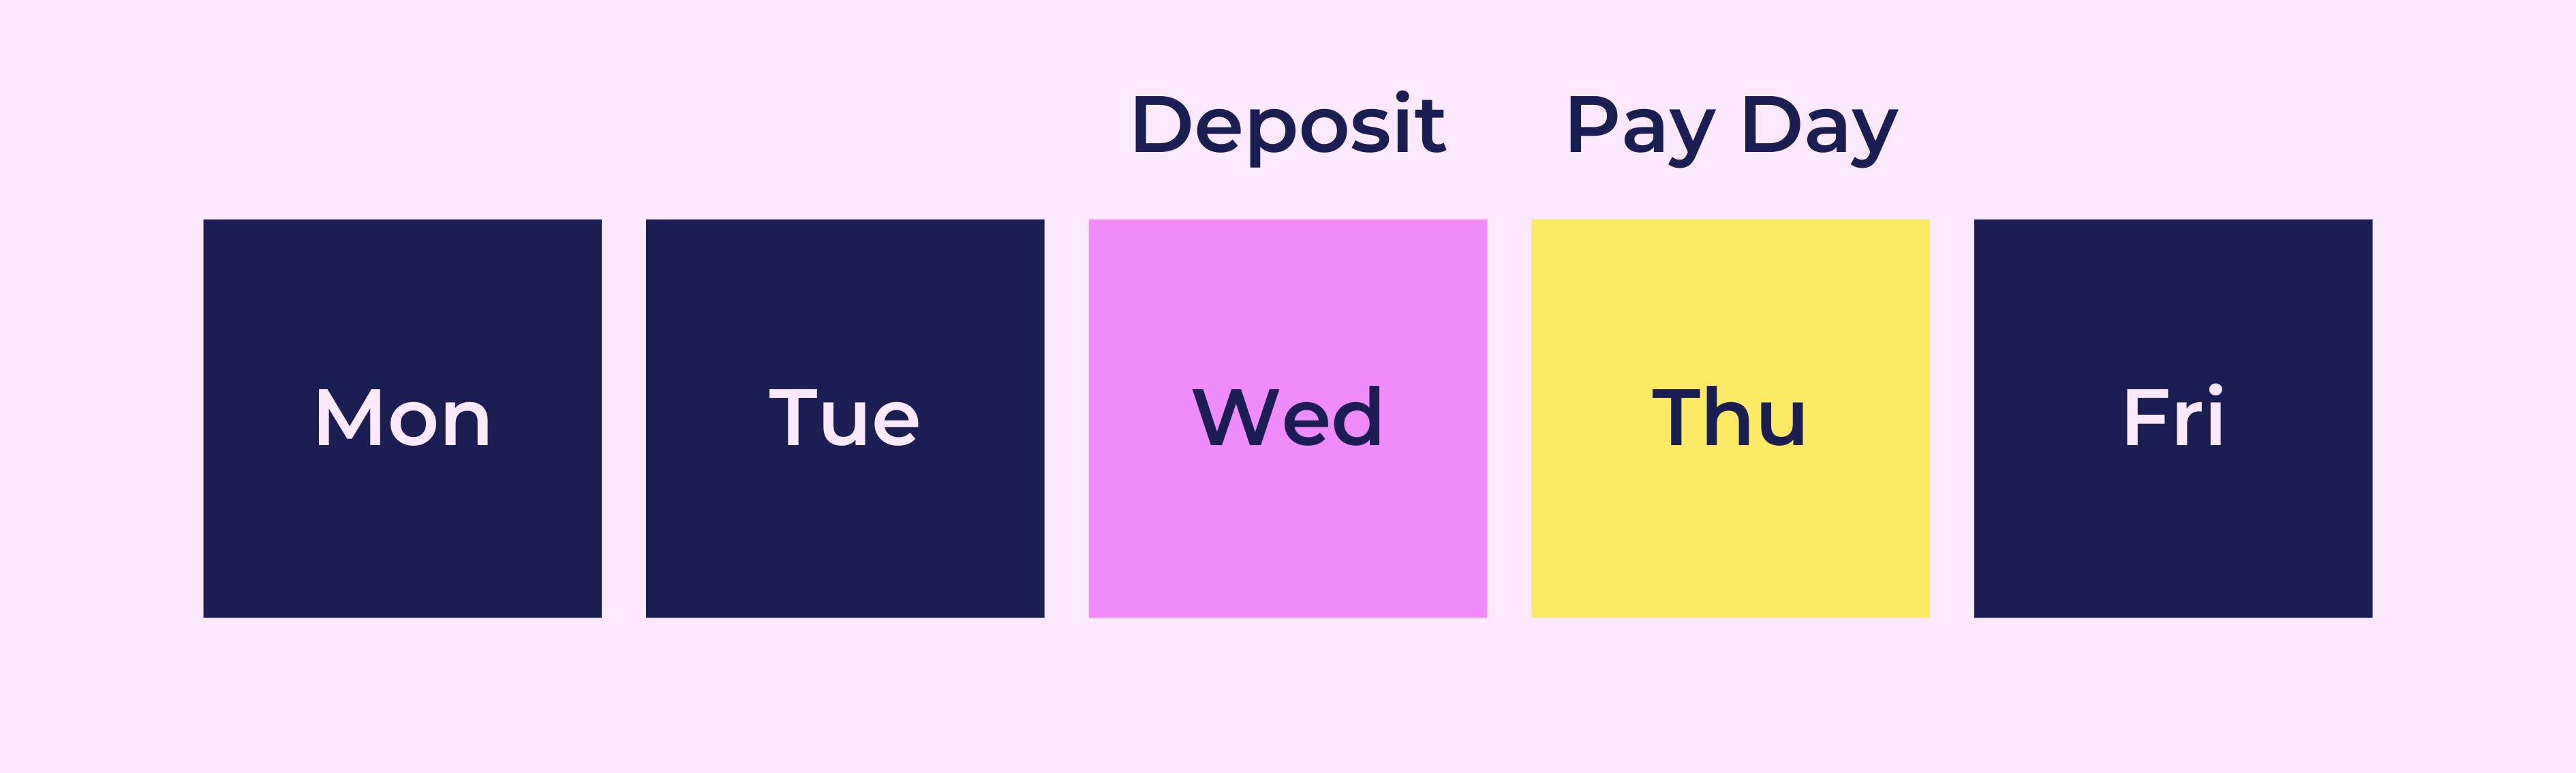 Fast Plan diagram showing the deposit on Wednesday and the pay day on Thursday